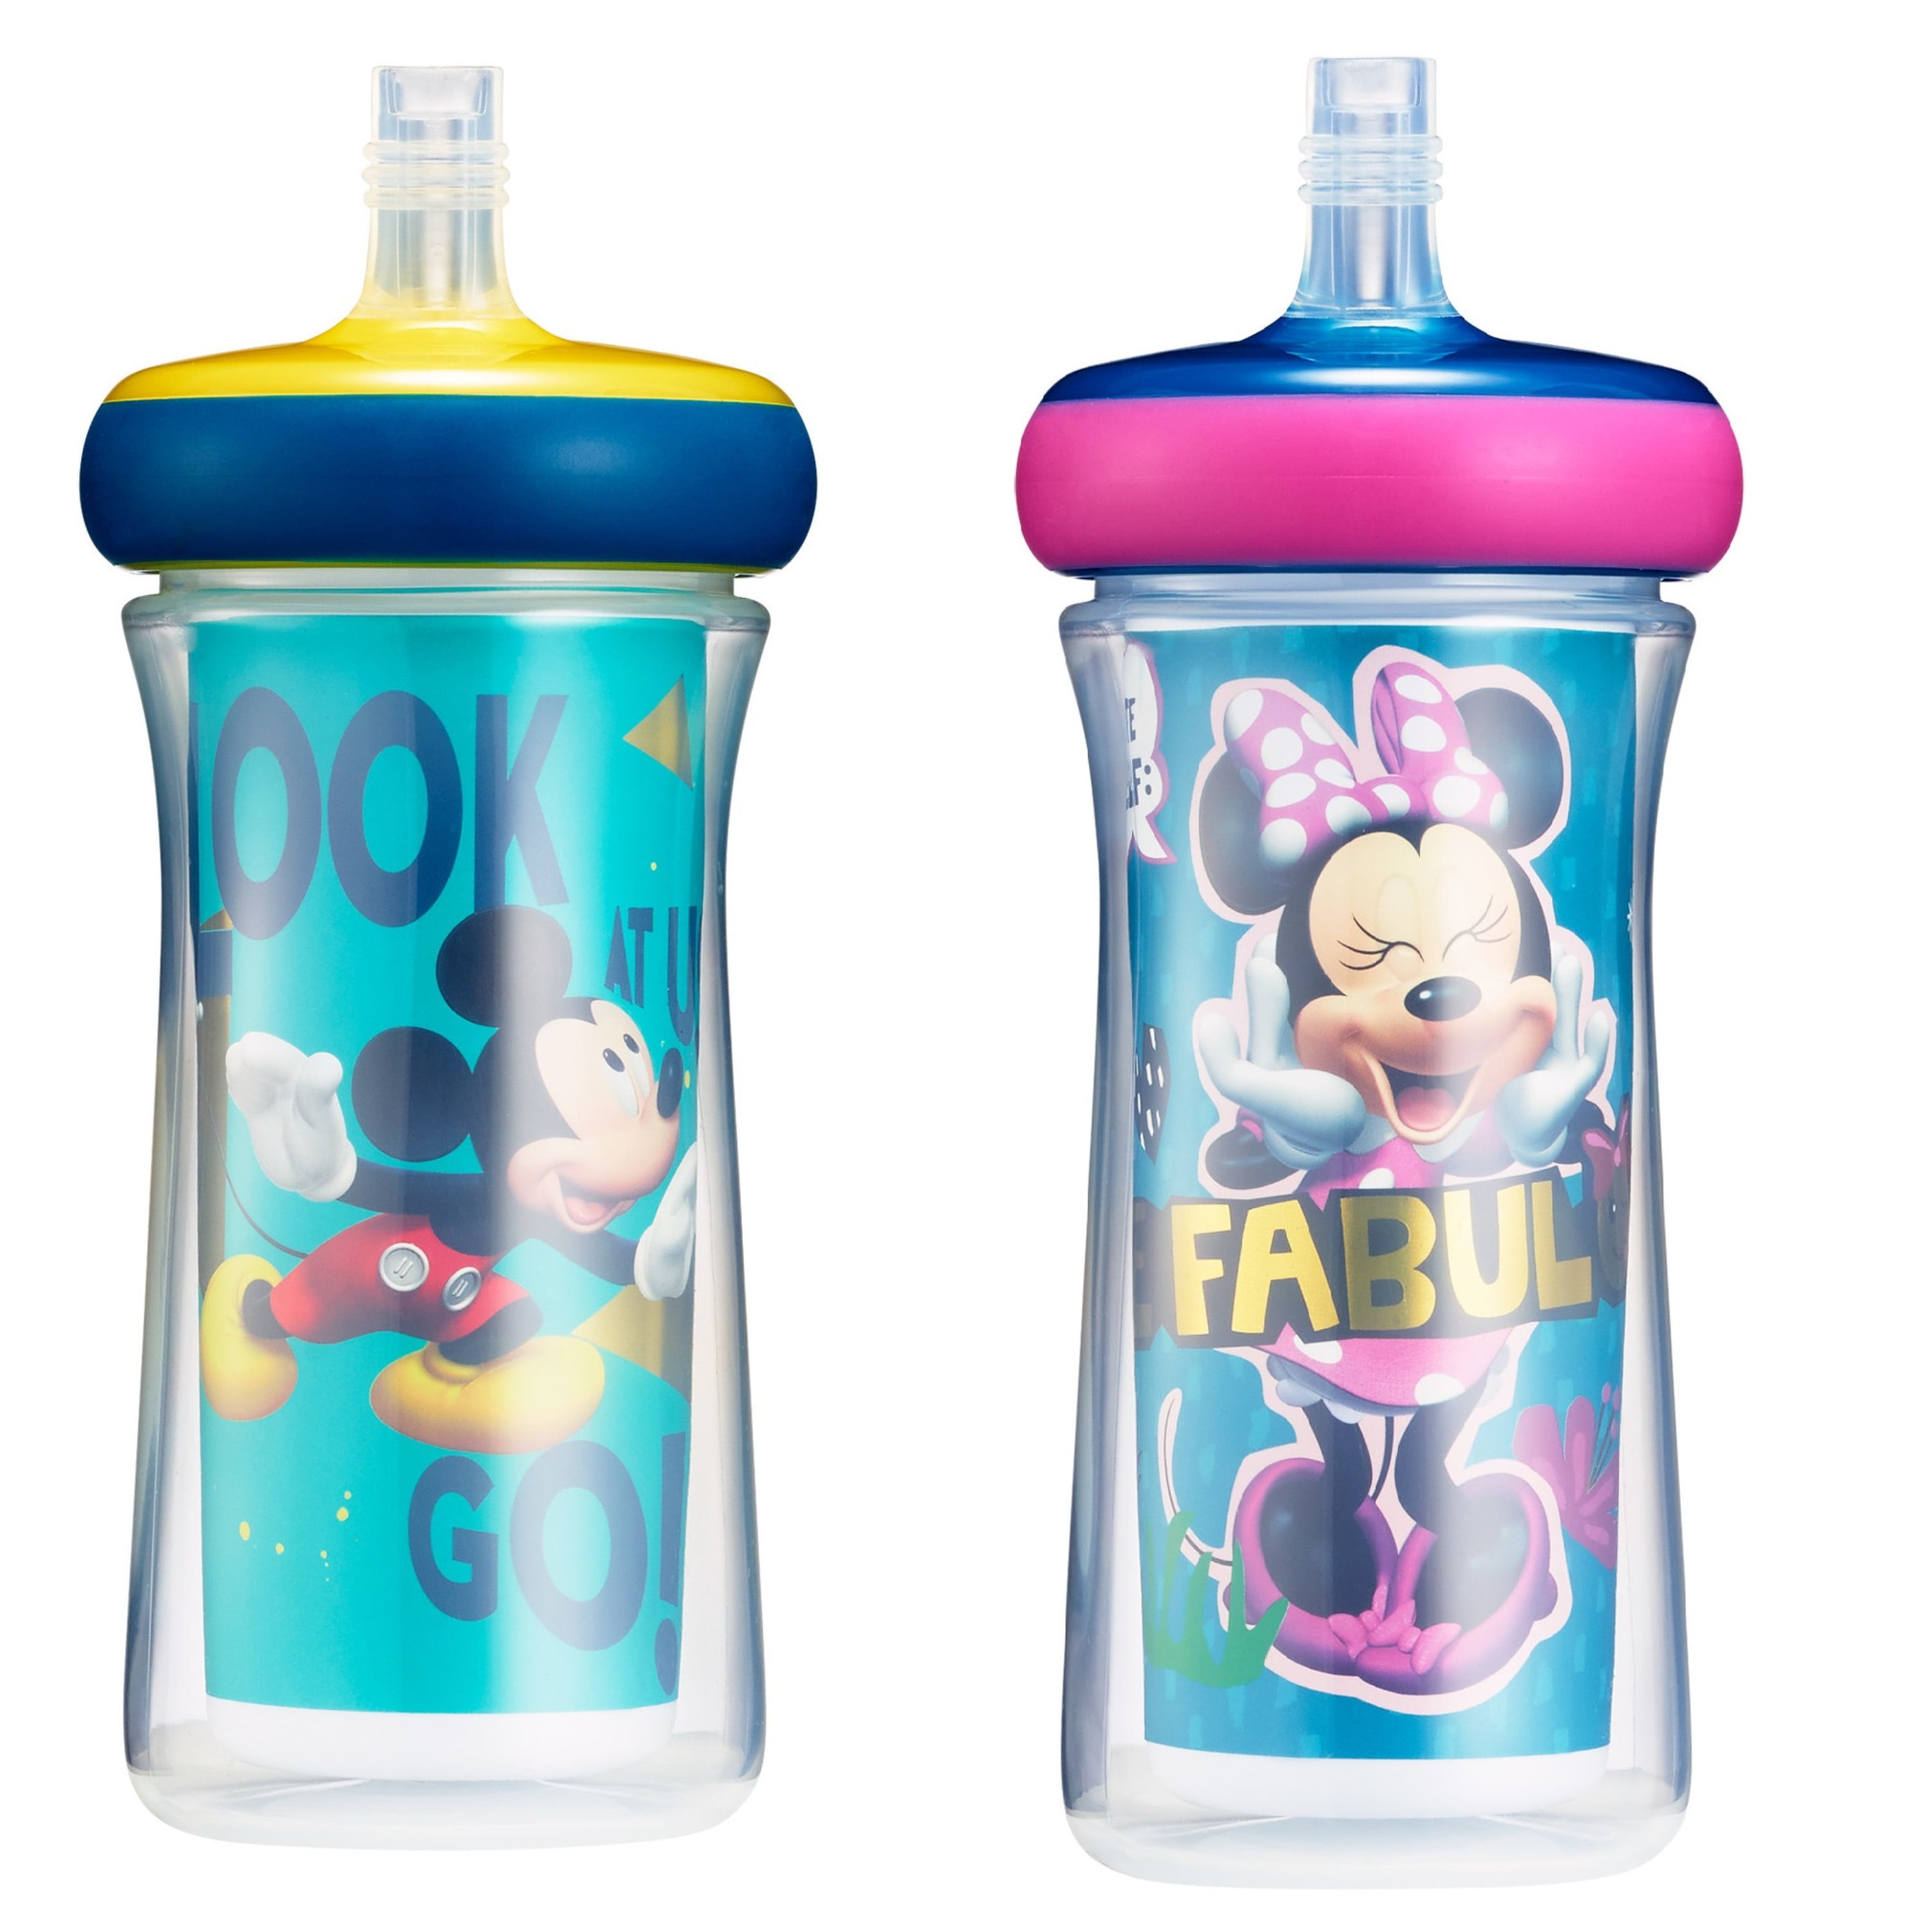 The First Years Disney Minnie Mouse Flip Top Straw Cup - 2pk/ 9oz